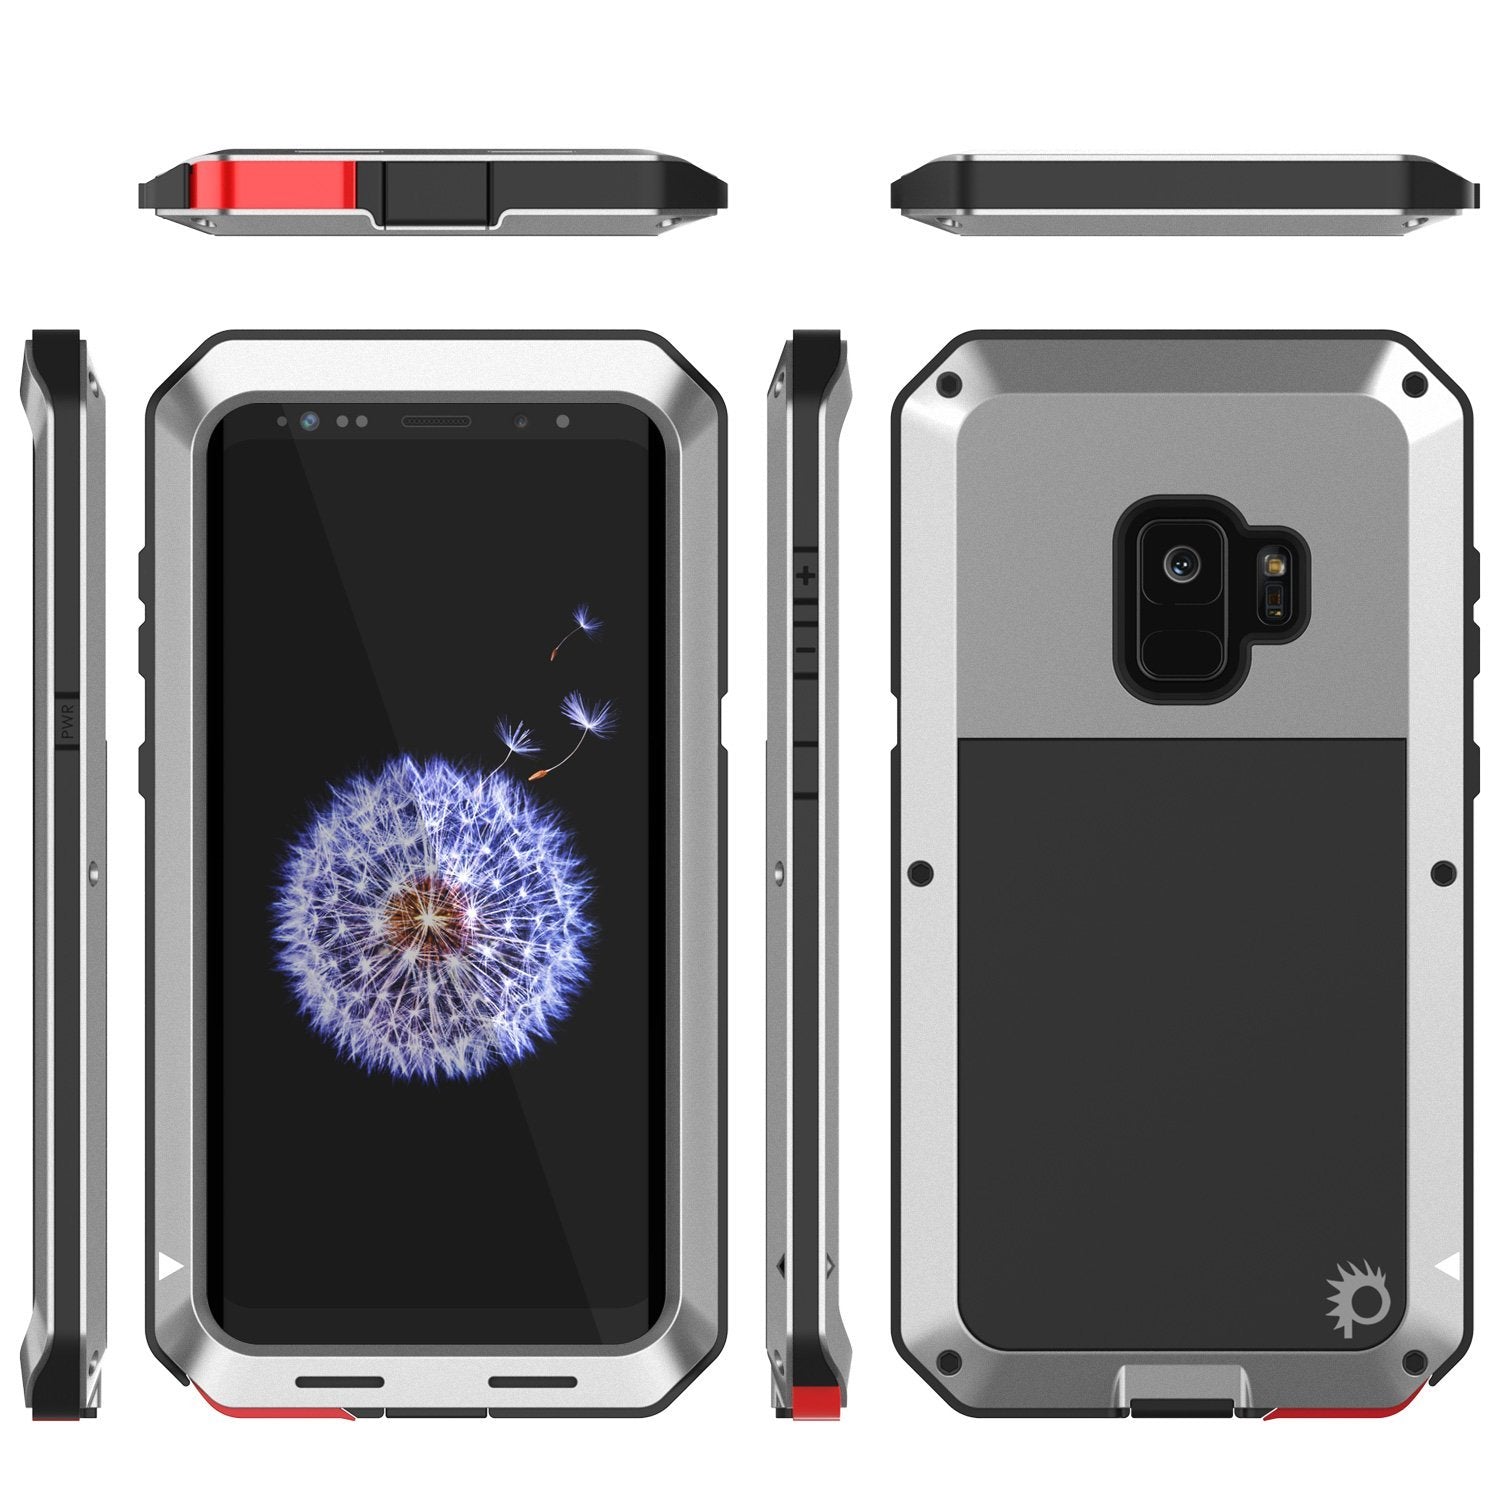 Galaxy S10 Metal Case, Heavy Duty Military Grade Rugged Armor Cover [Silver]